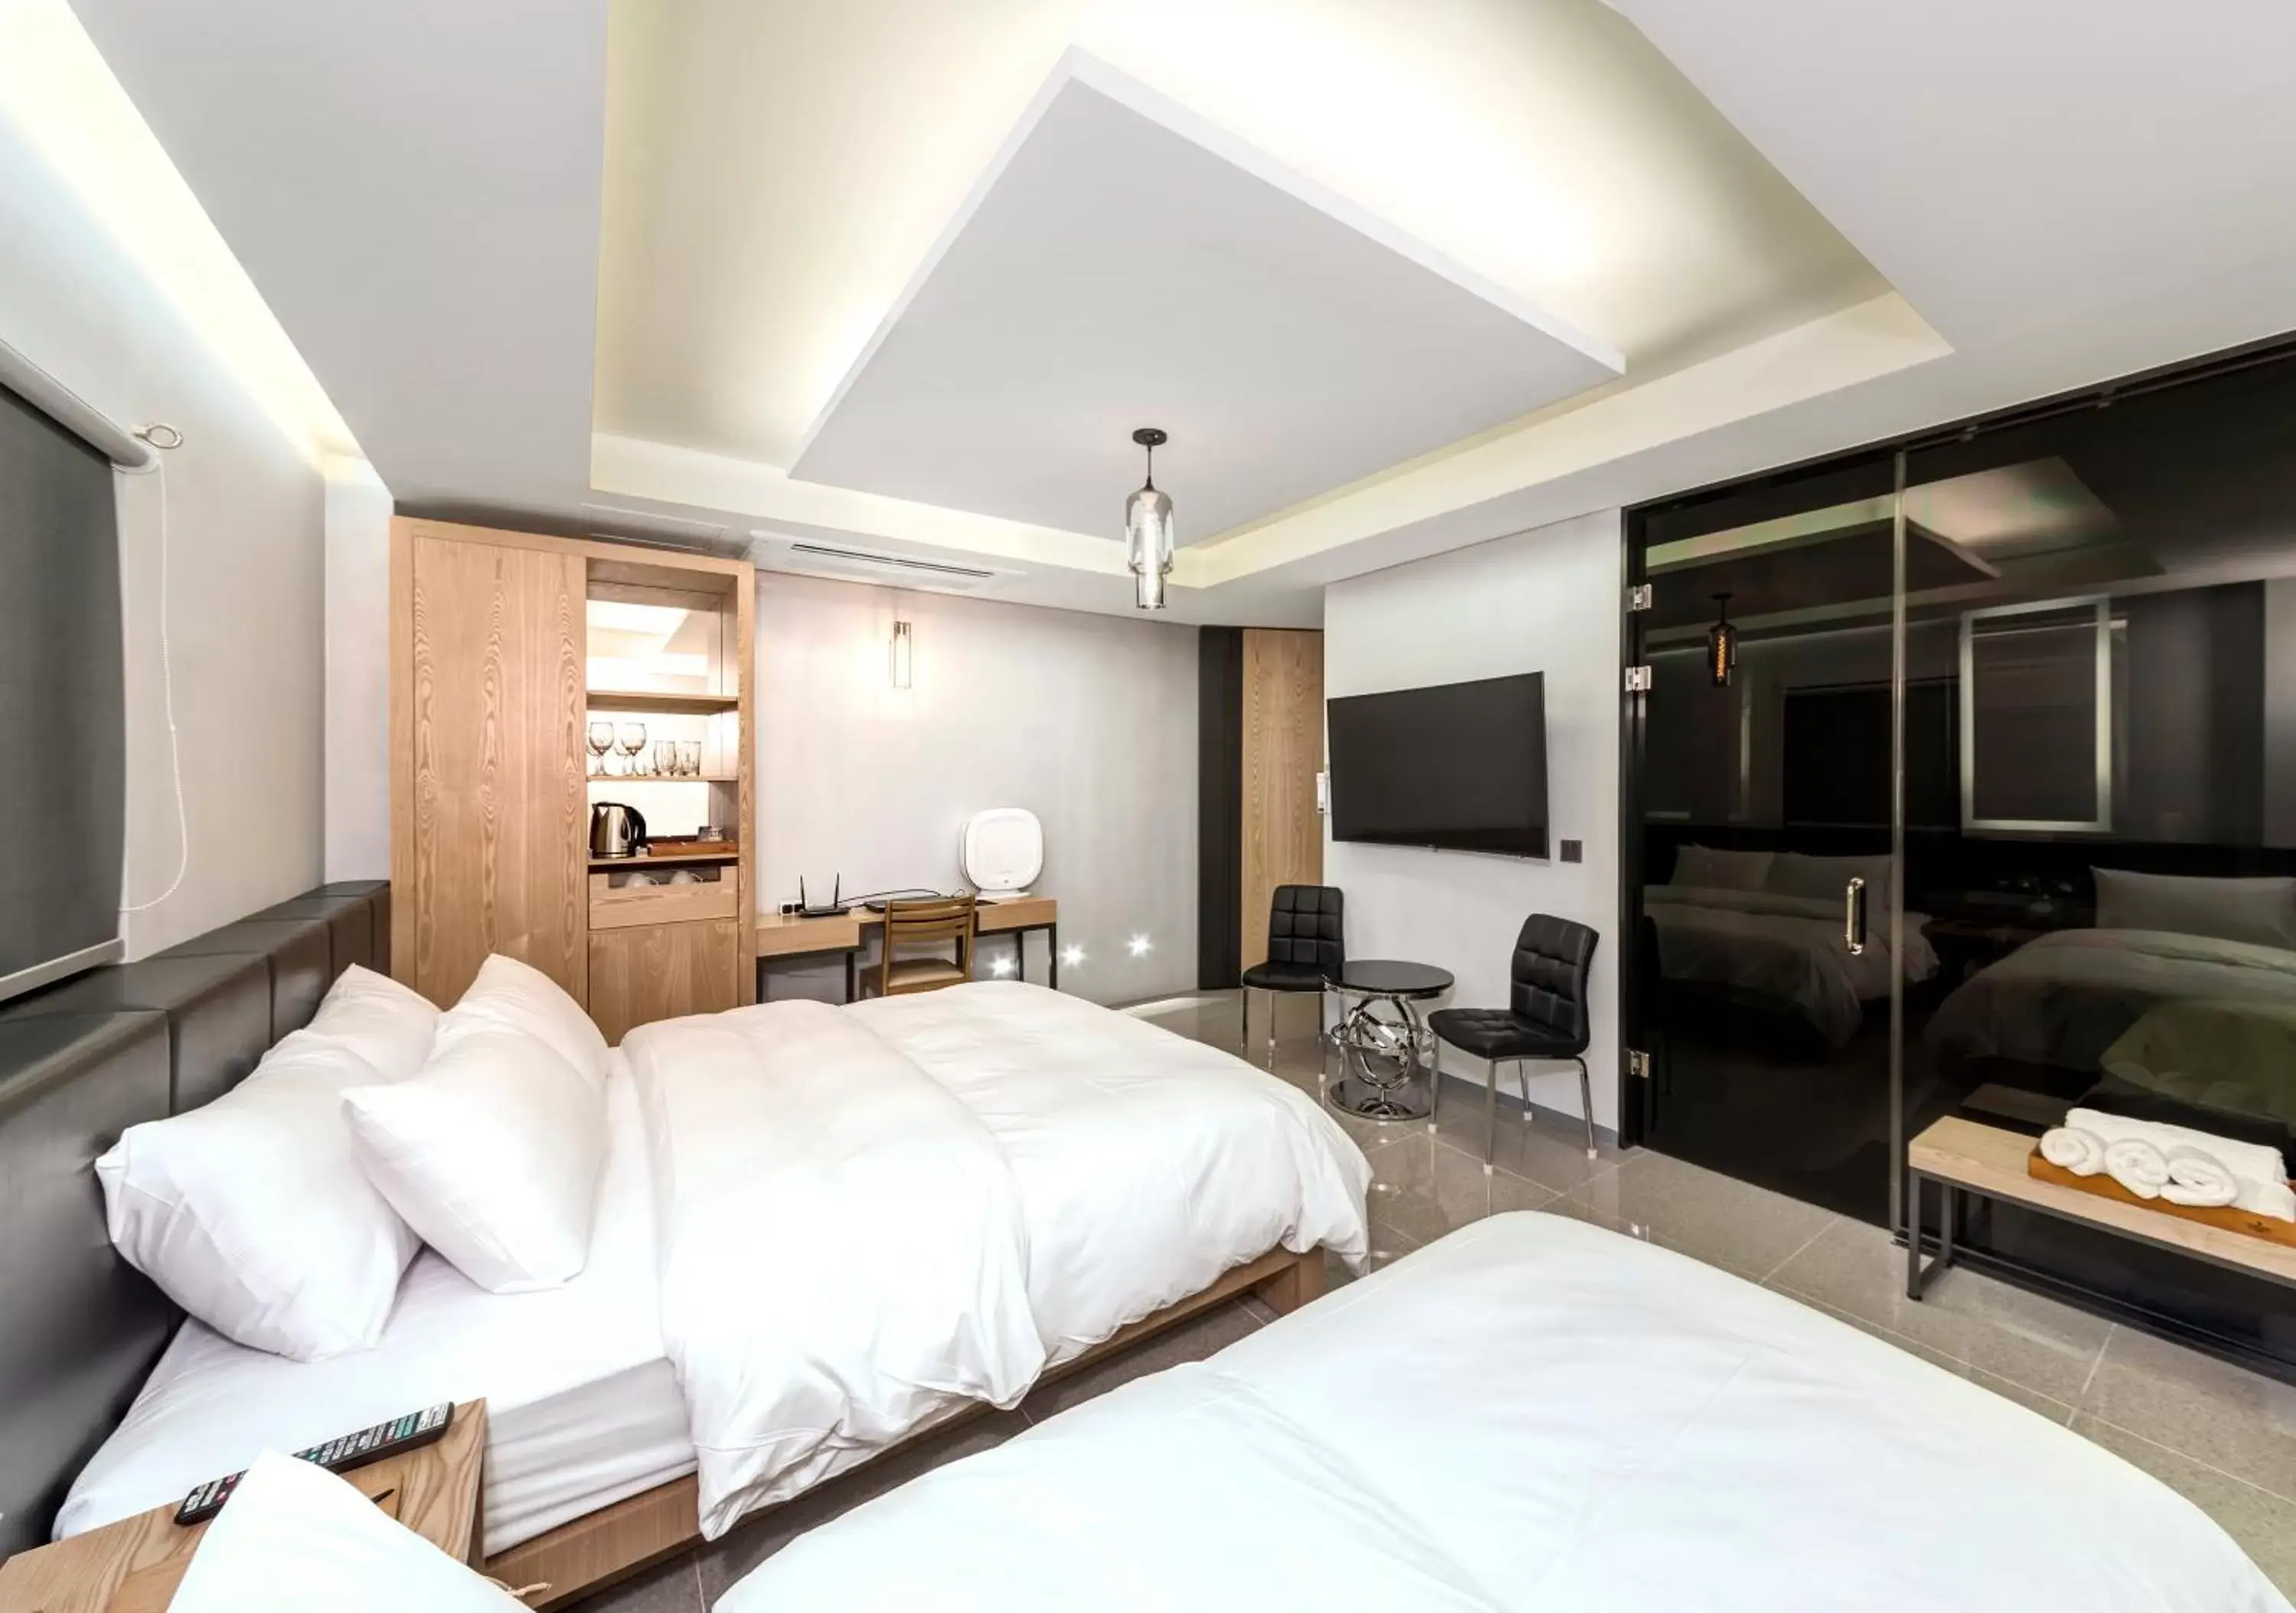 Area and facilities, Room Photo in Capace Hotel Gangnam